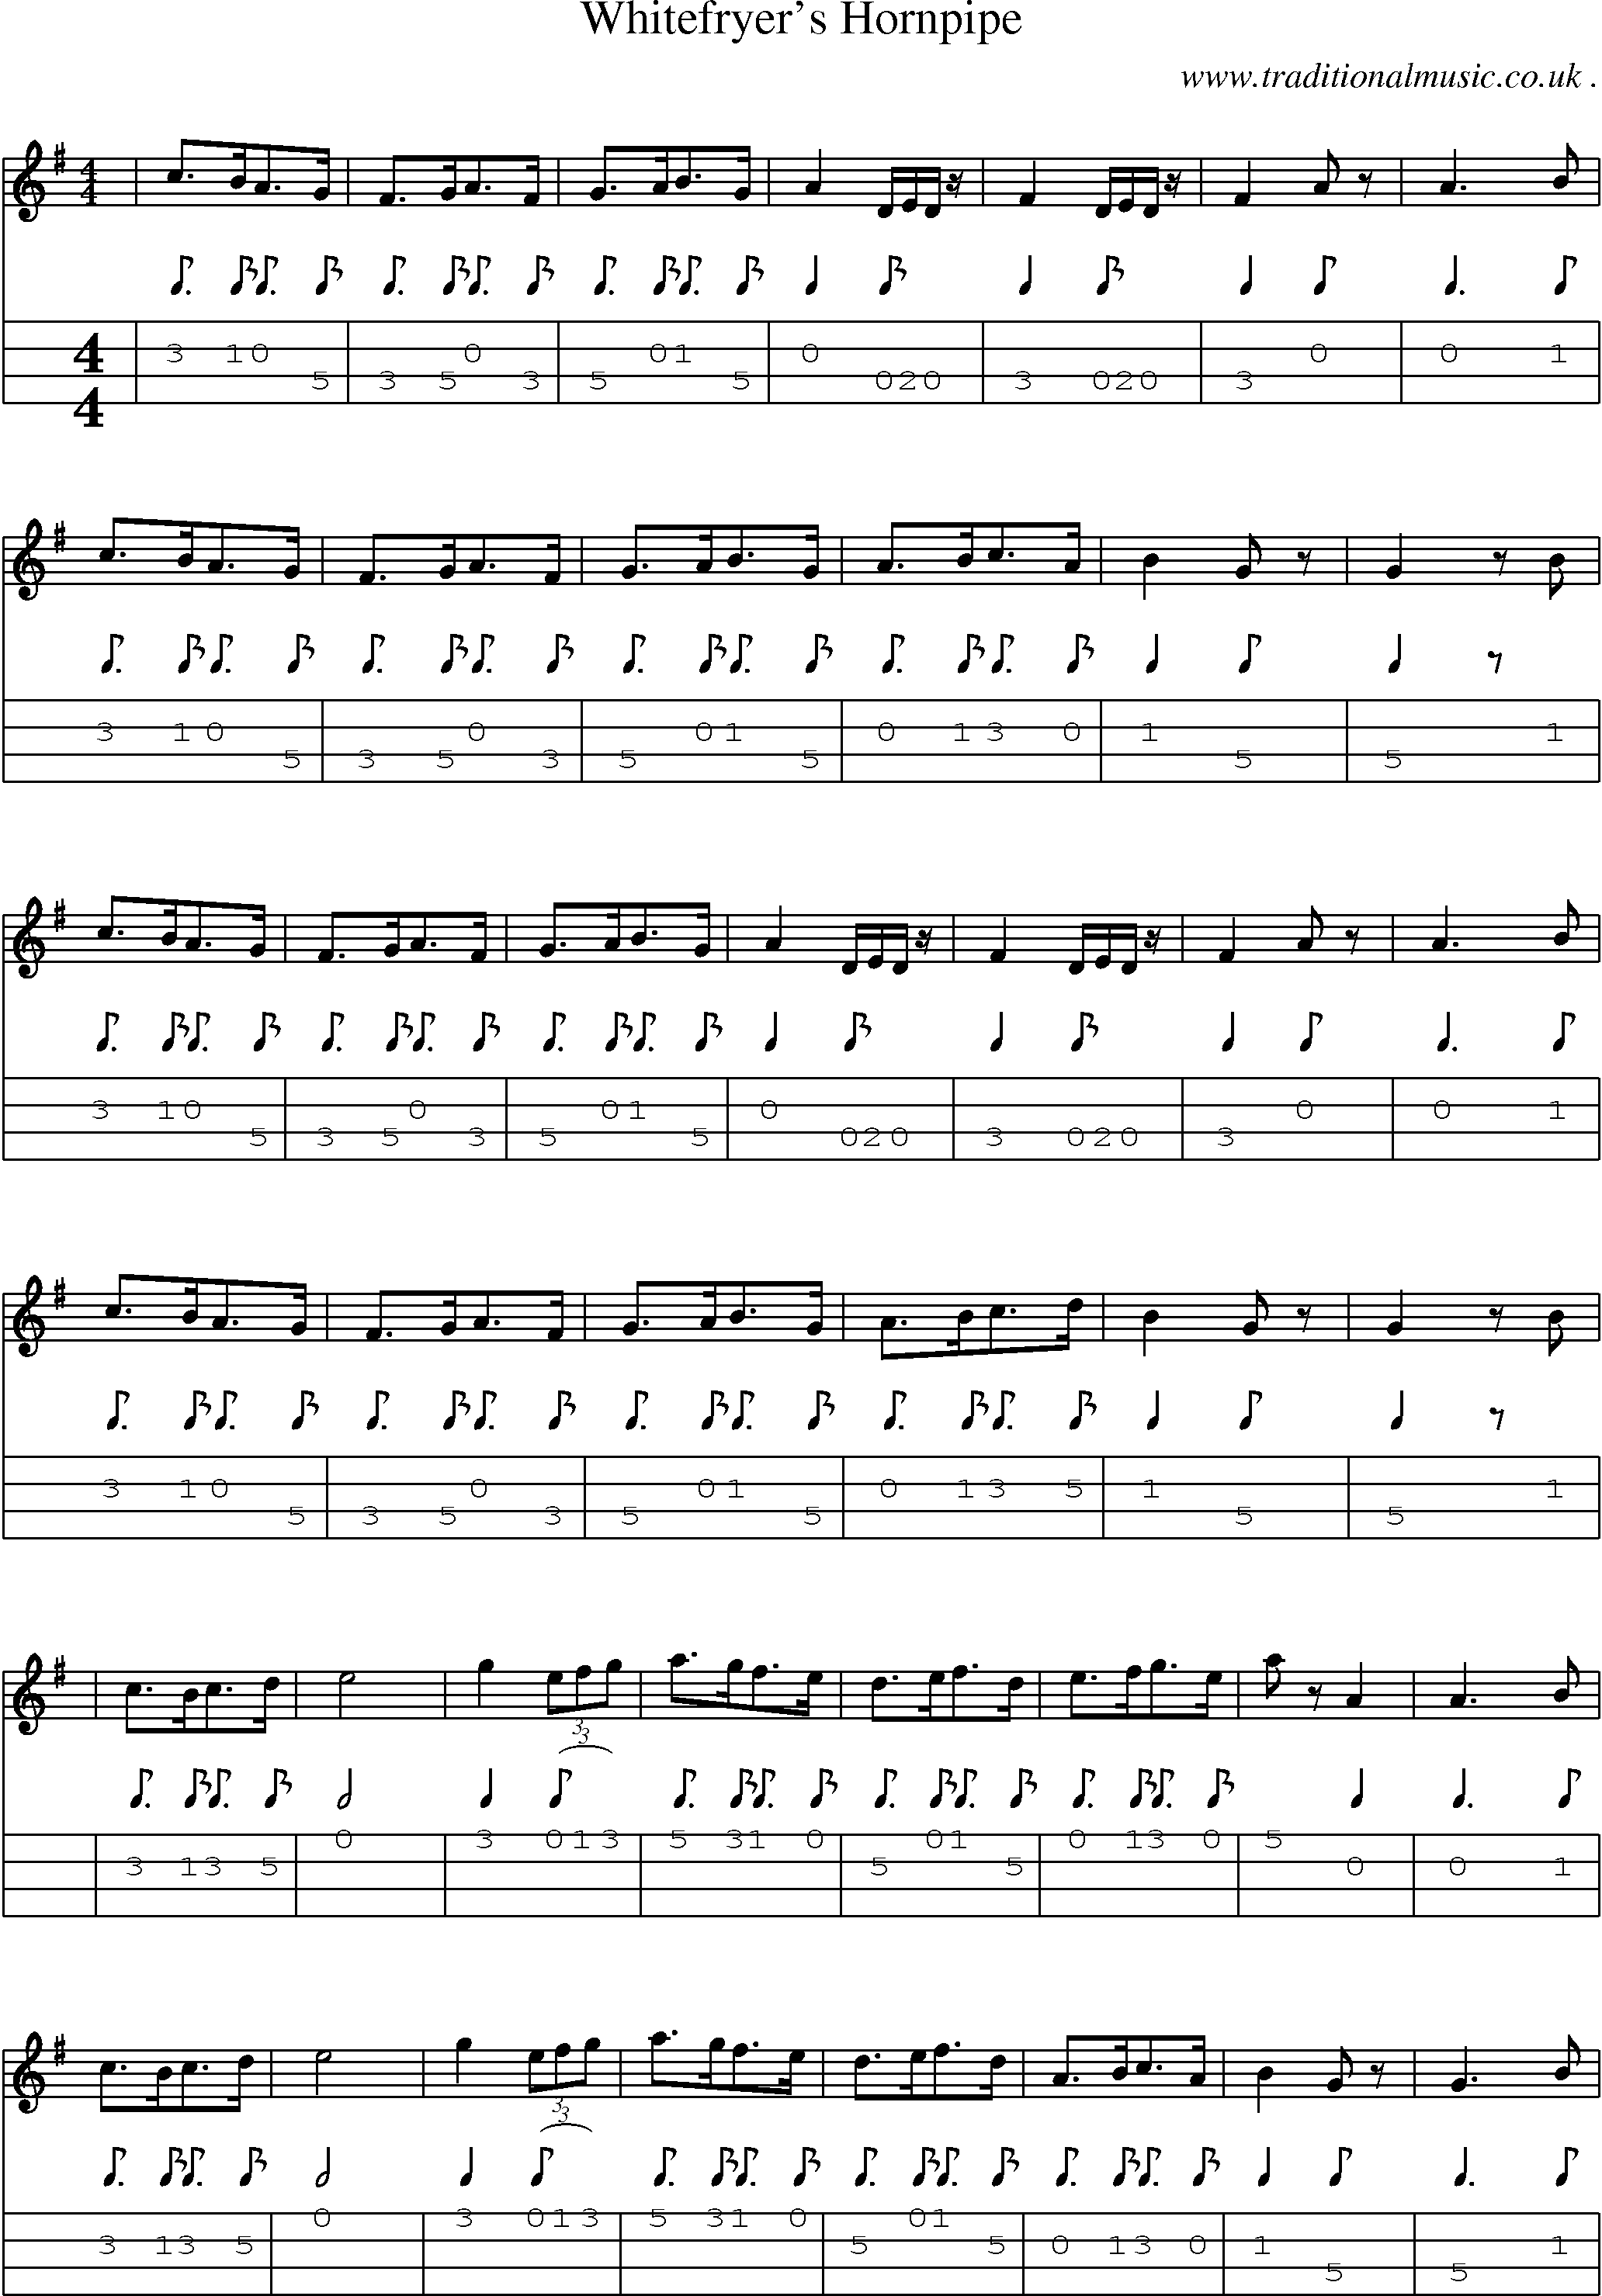 Sheet-Music and Mandolin Tabs for Whitefryers Hornpipe